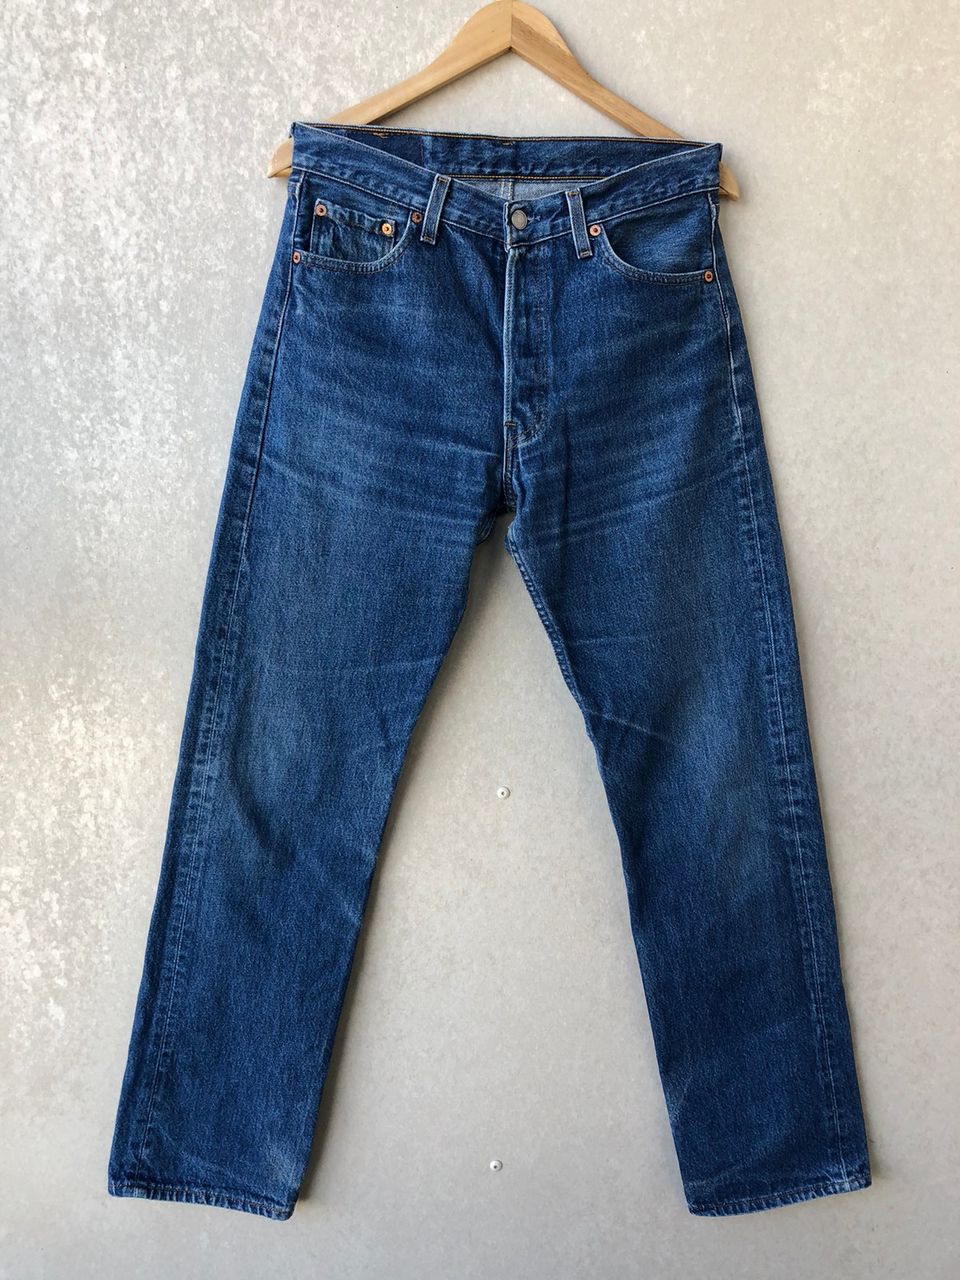 Vintage Levi’s 501 W30/L32 Made in USA